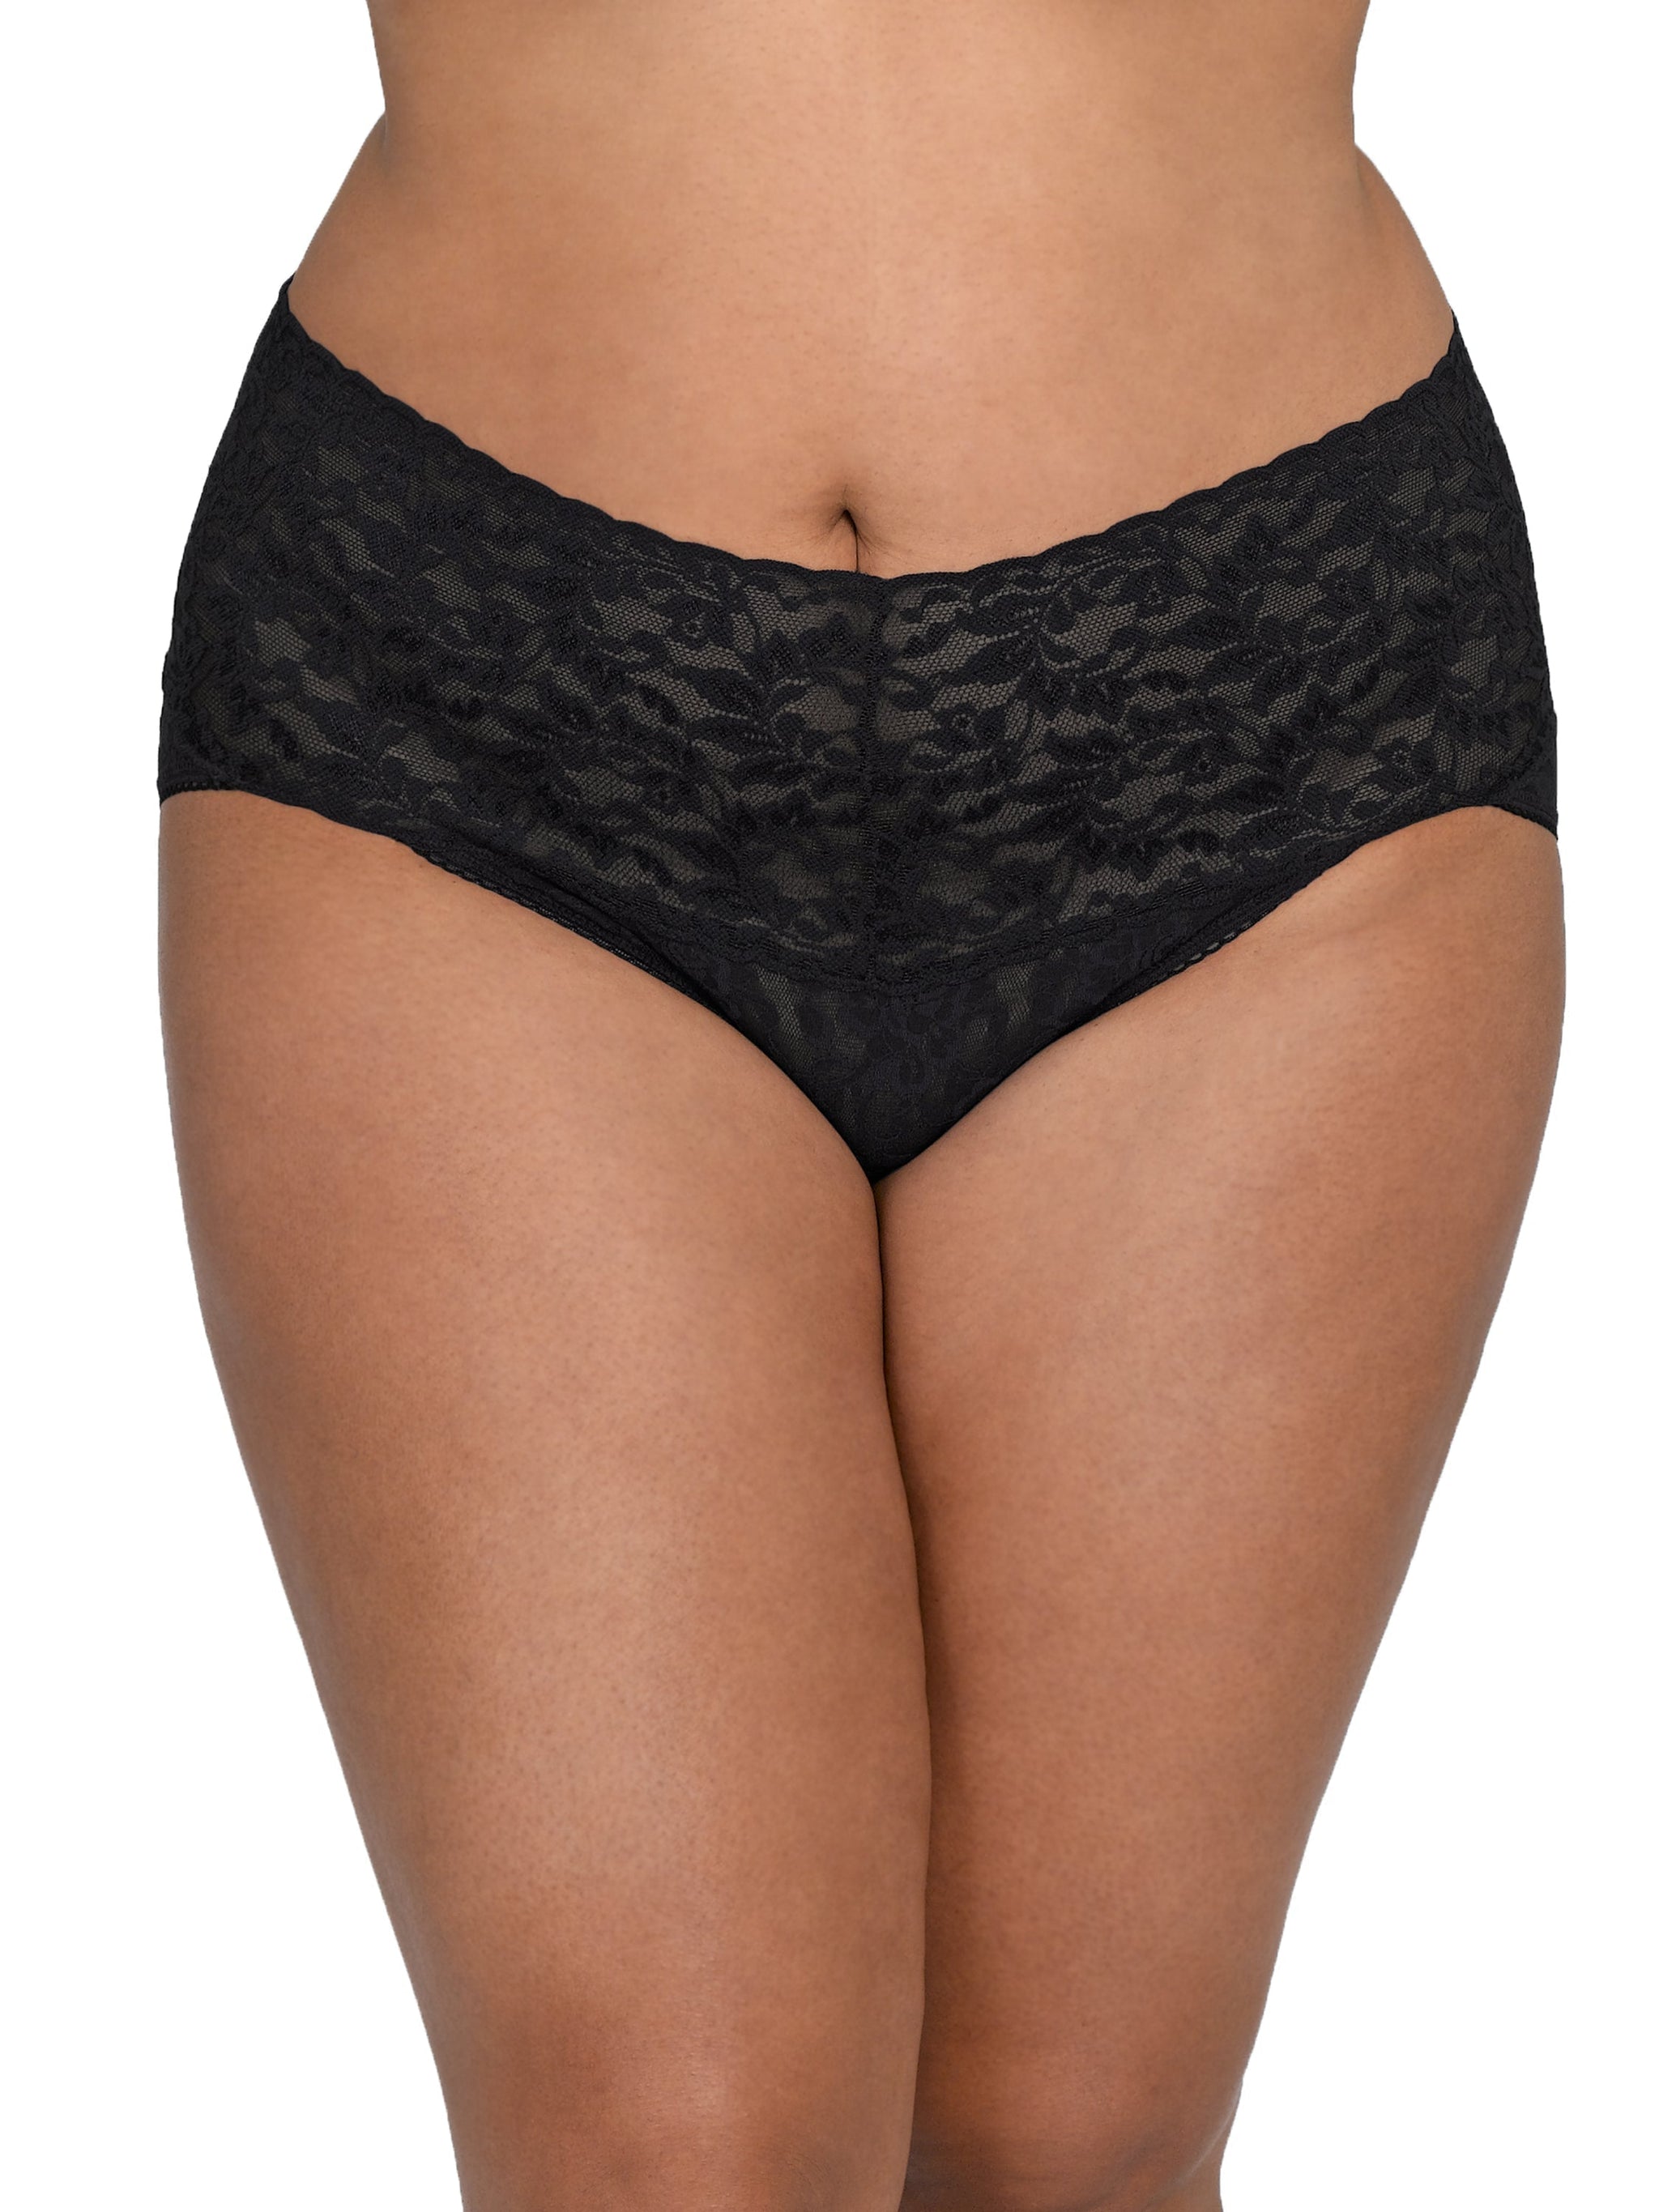 Plus Size Underwear, Extended Sizing Lingerie